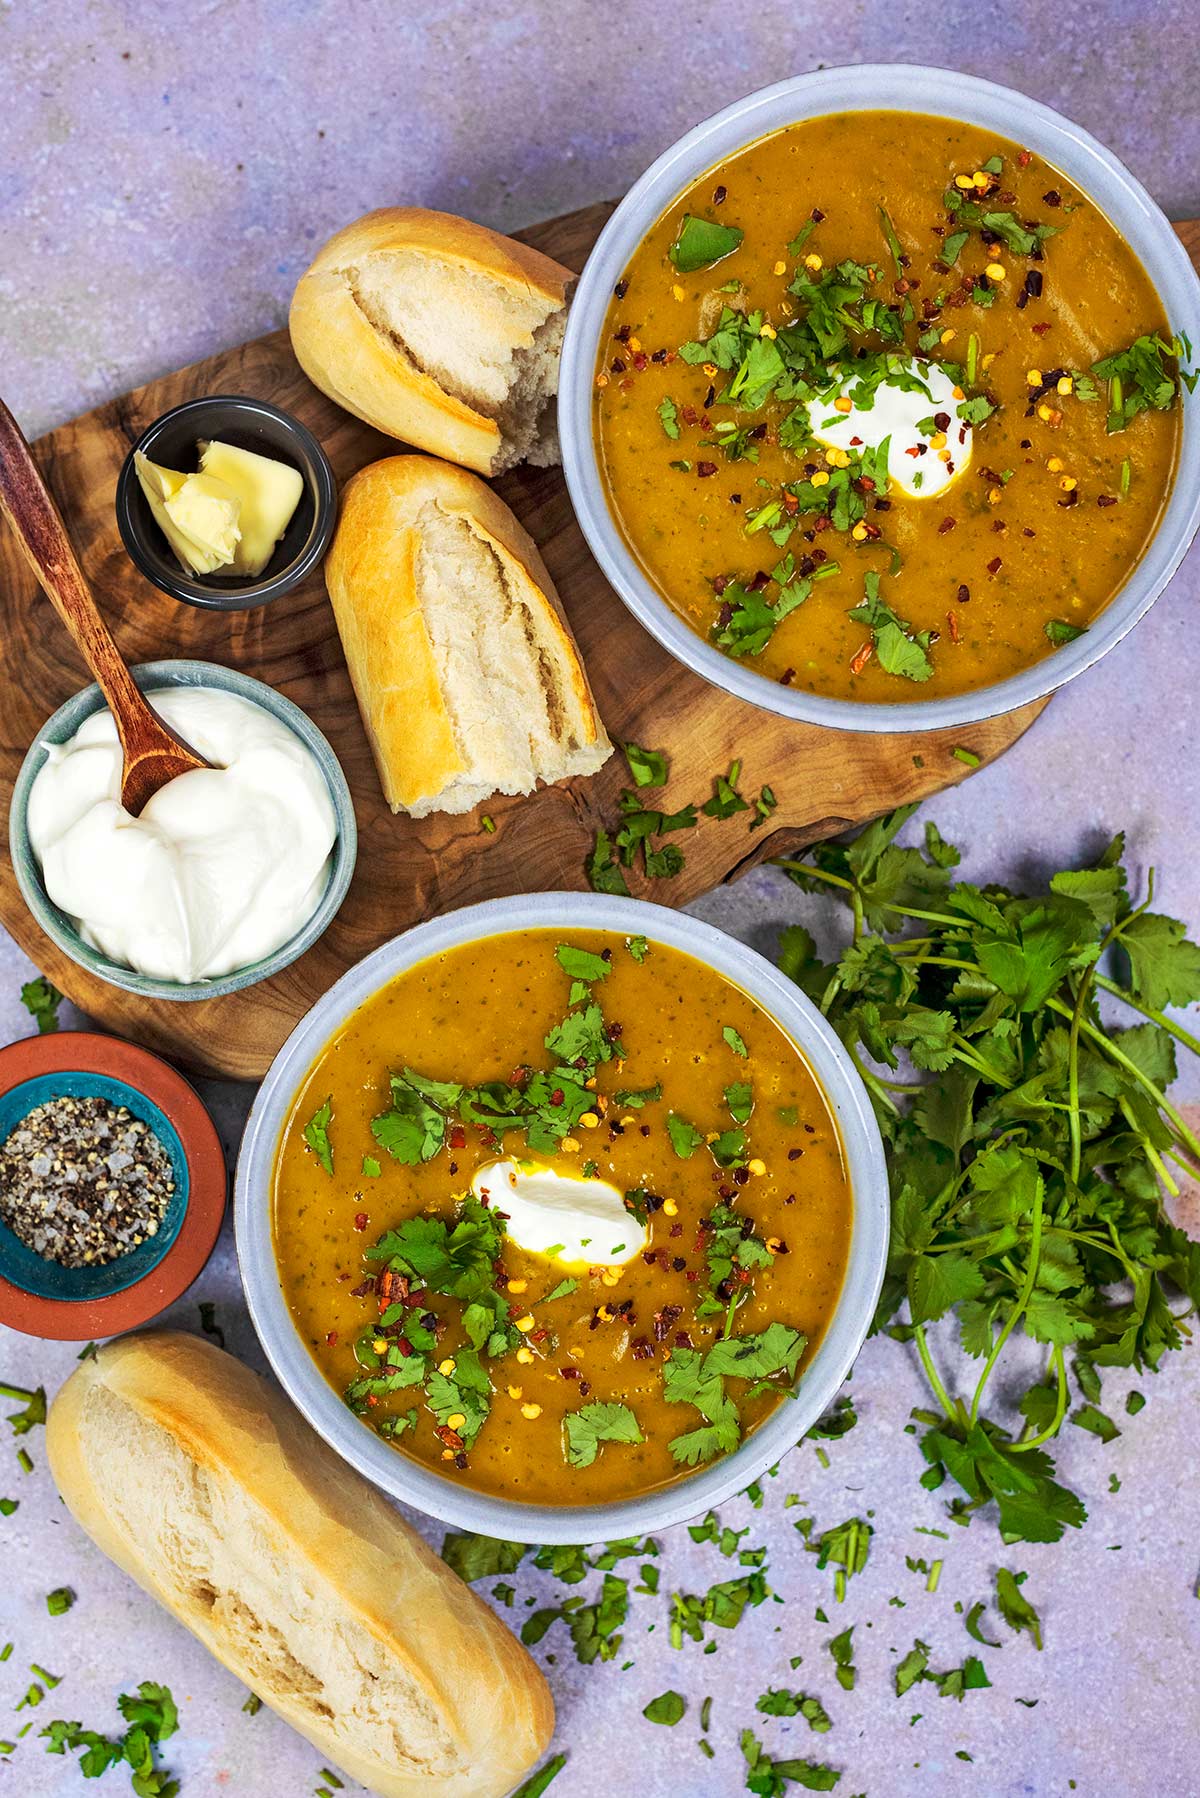 Two bowls of soup surrounded by bread and chopped herbs.